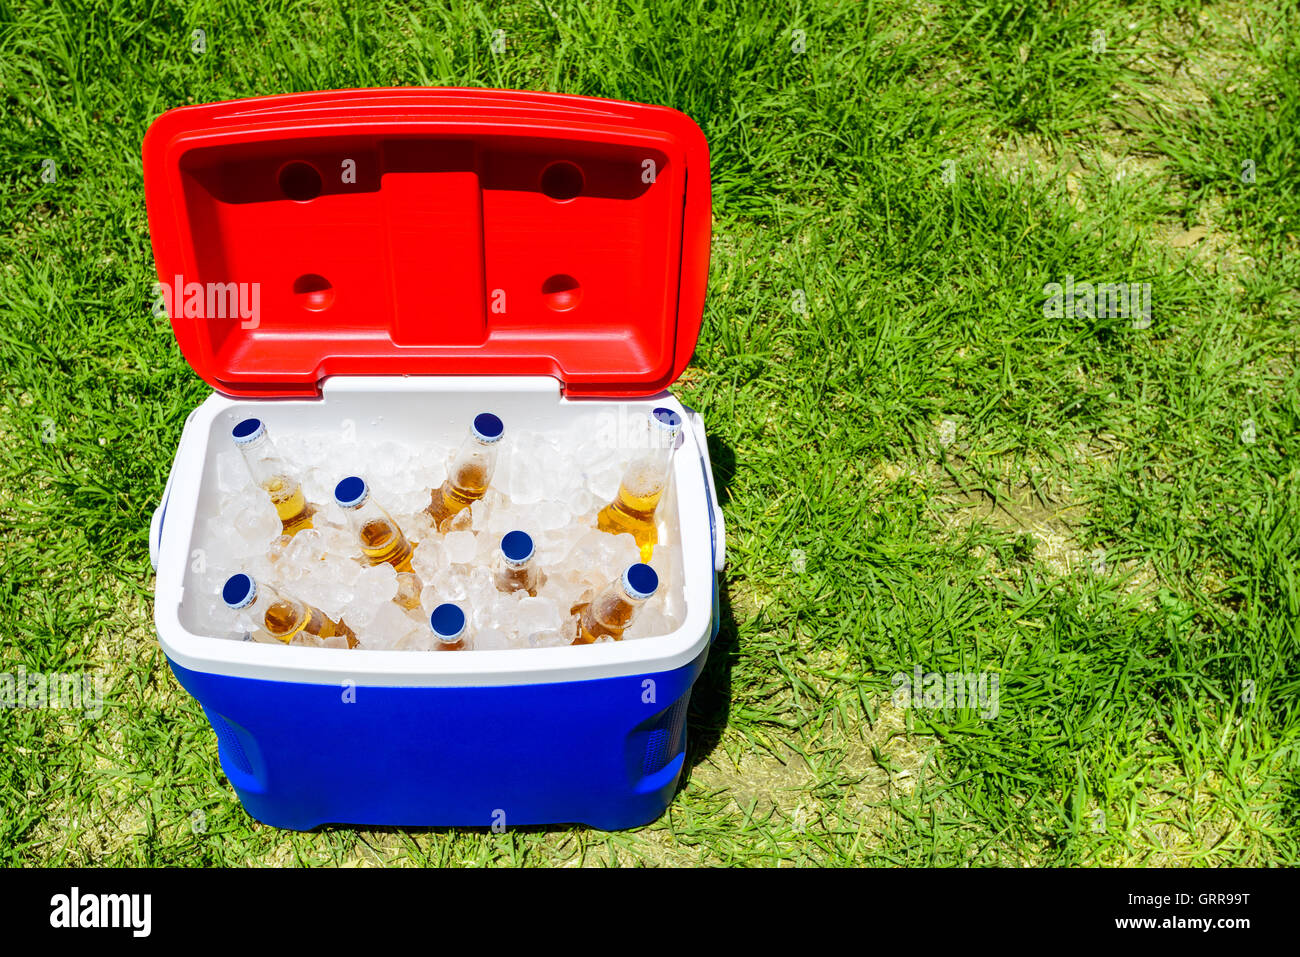 Picnic cooler box with bottles of beer in ice on grass during Australia Day  celebration Stock Photo - Alamy